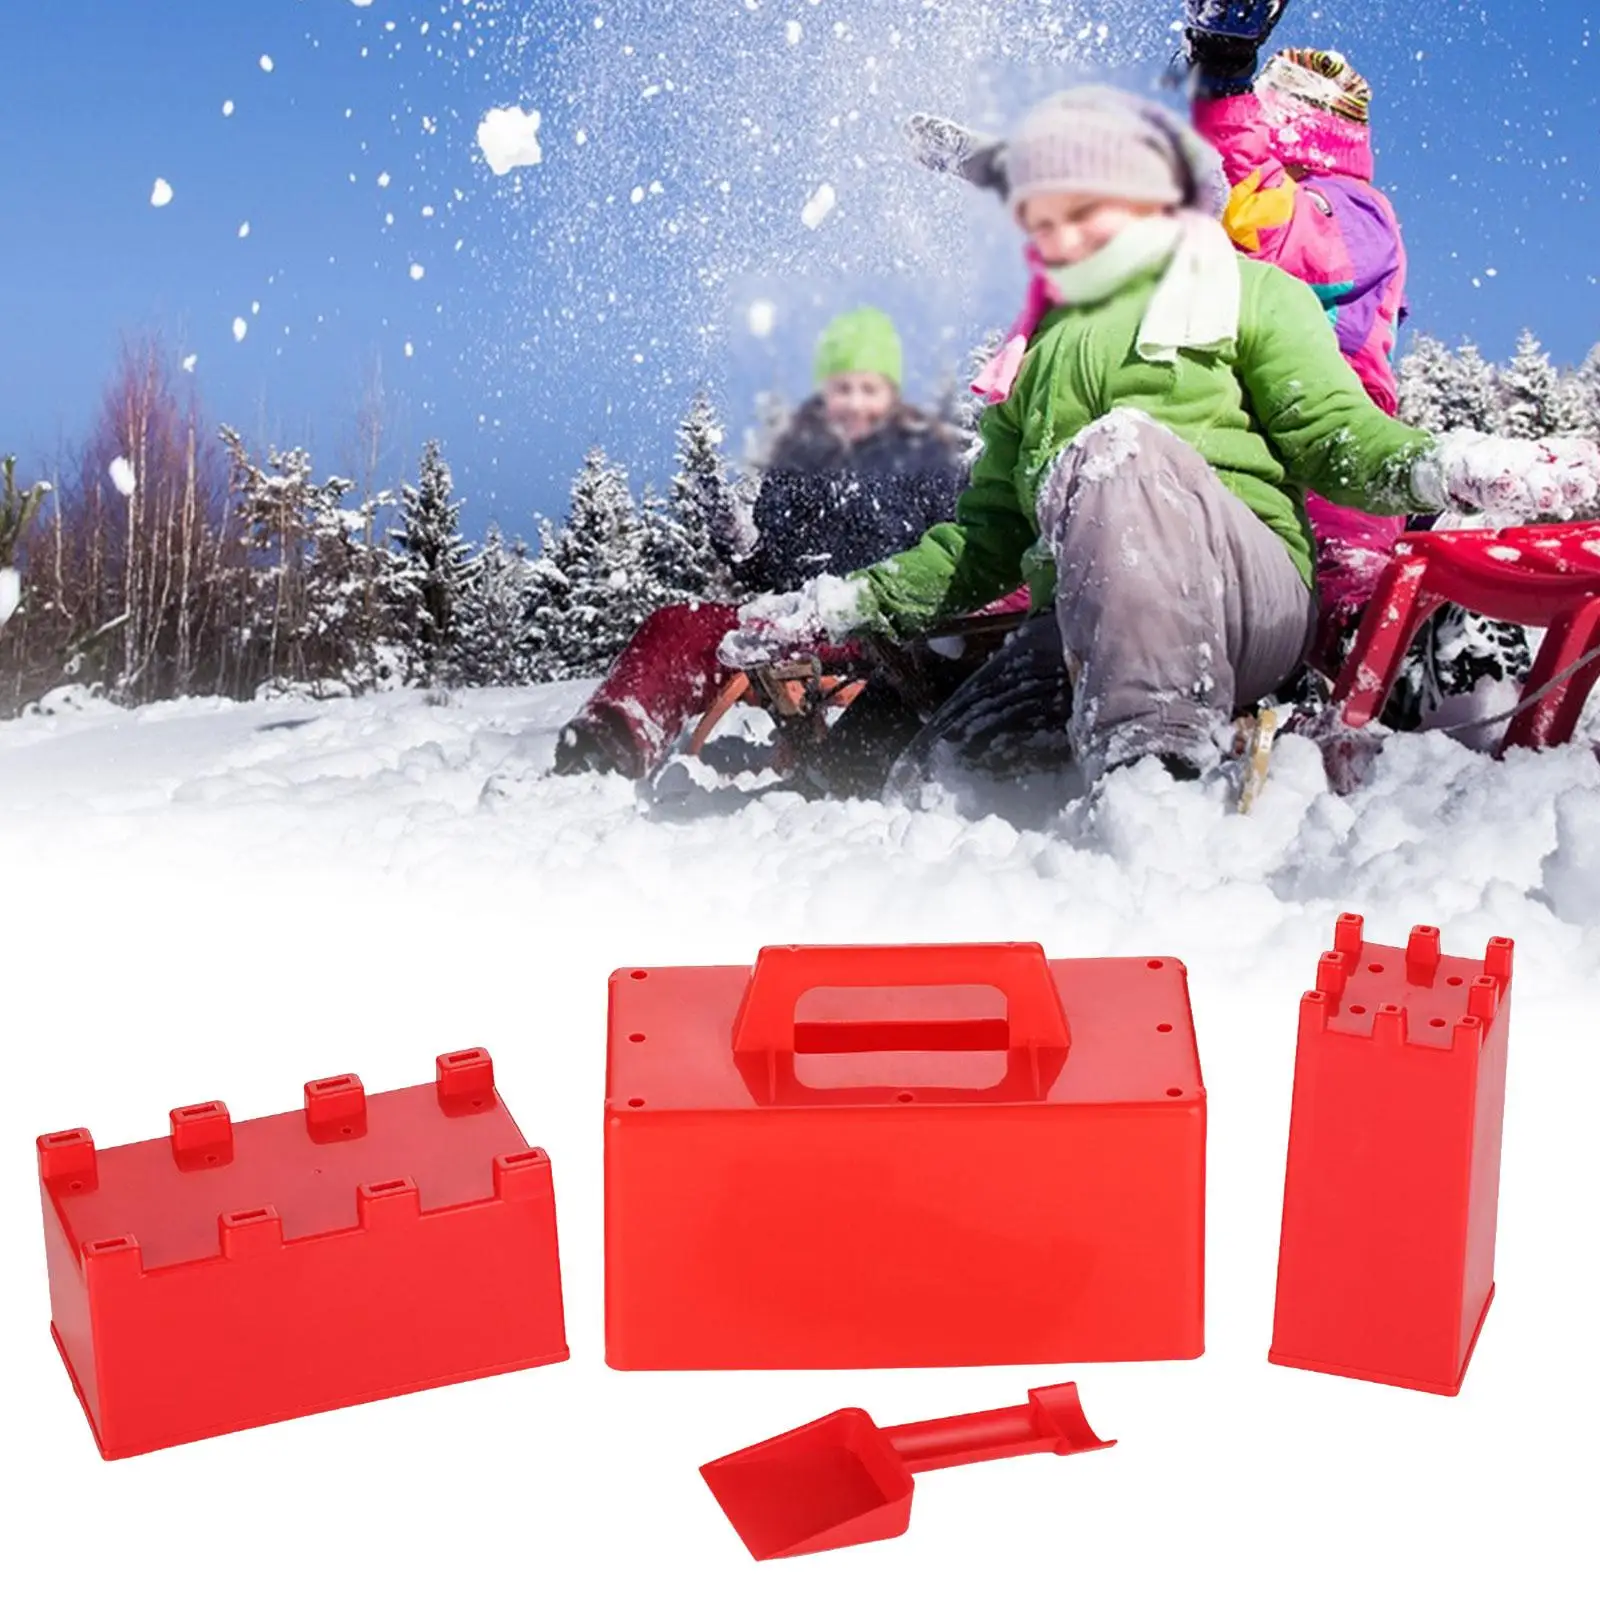 4Pcs Sand Castle Model, Snow Brick Building Maker, Interactive Outside Snow and Sand Beach Toys for Kids, Adults Toddlers